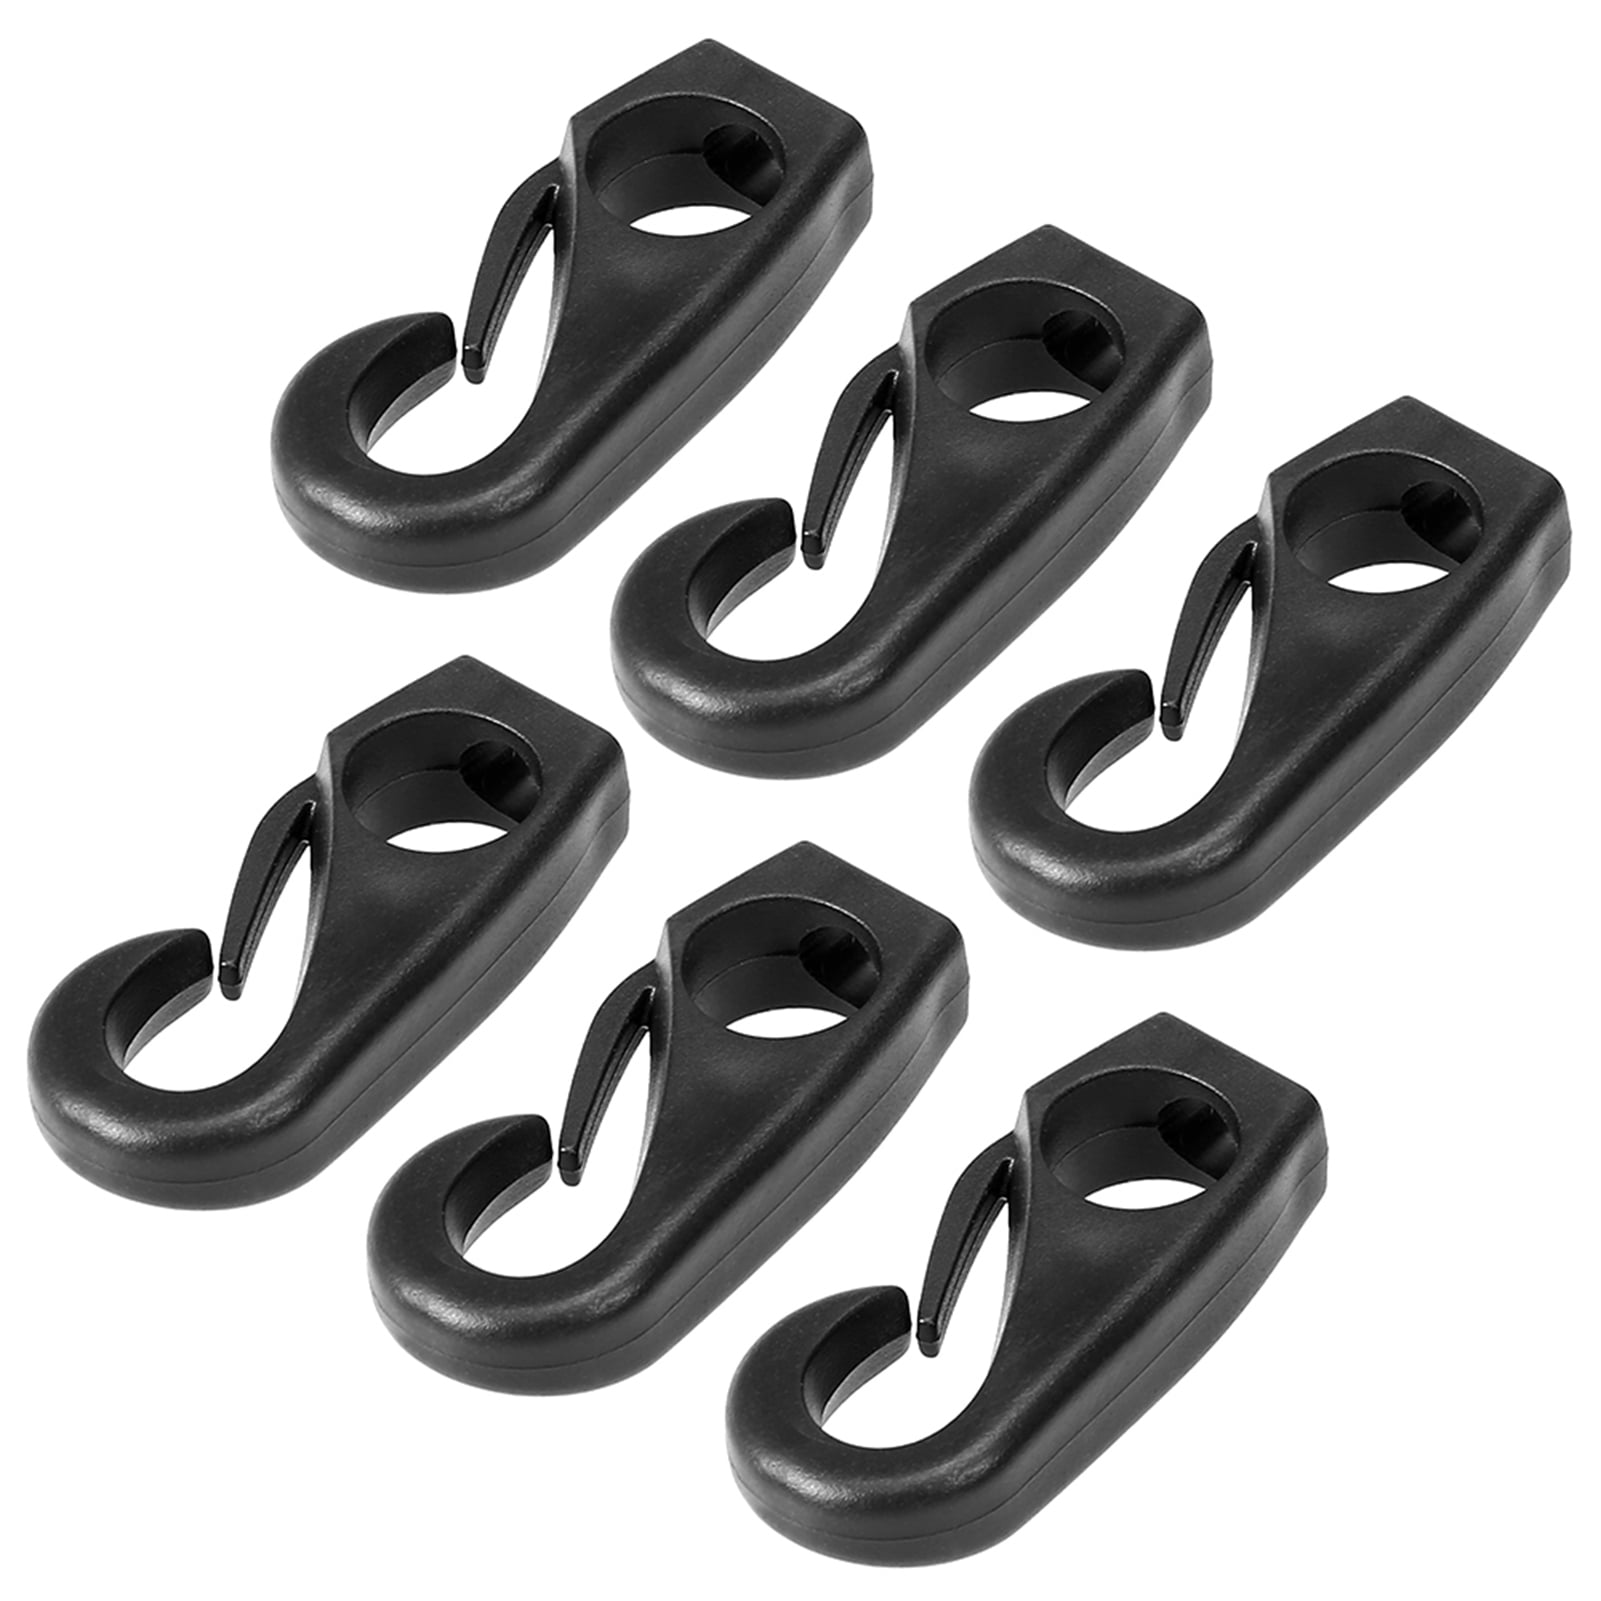 Ensure Safety and Stability with Kayak Plastic Hooks for 5 8mm Bungee Cords